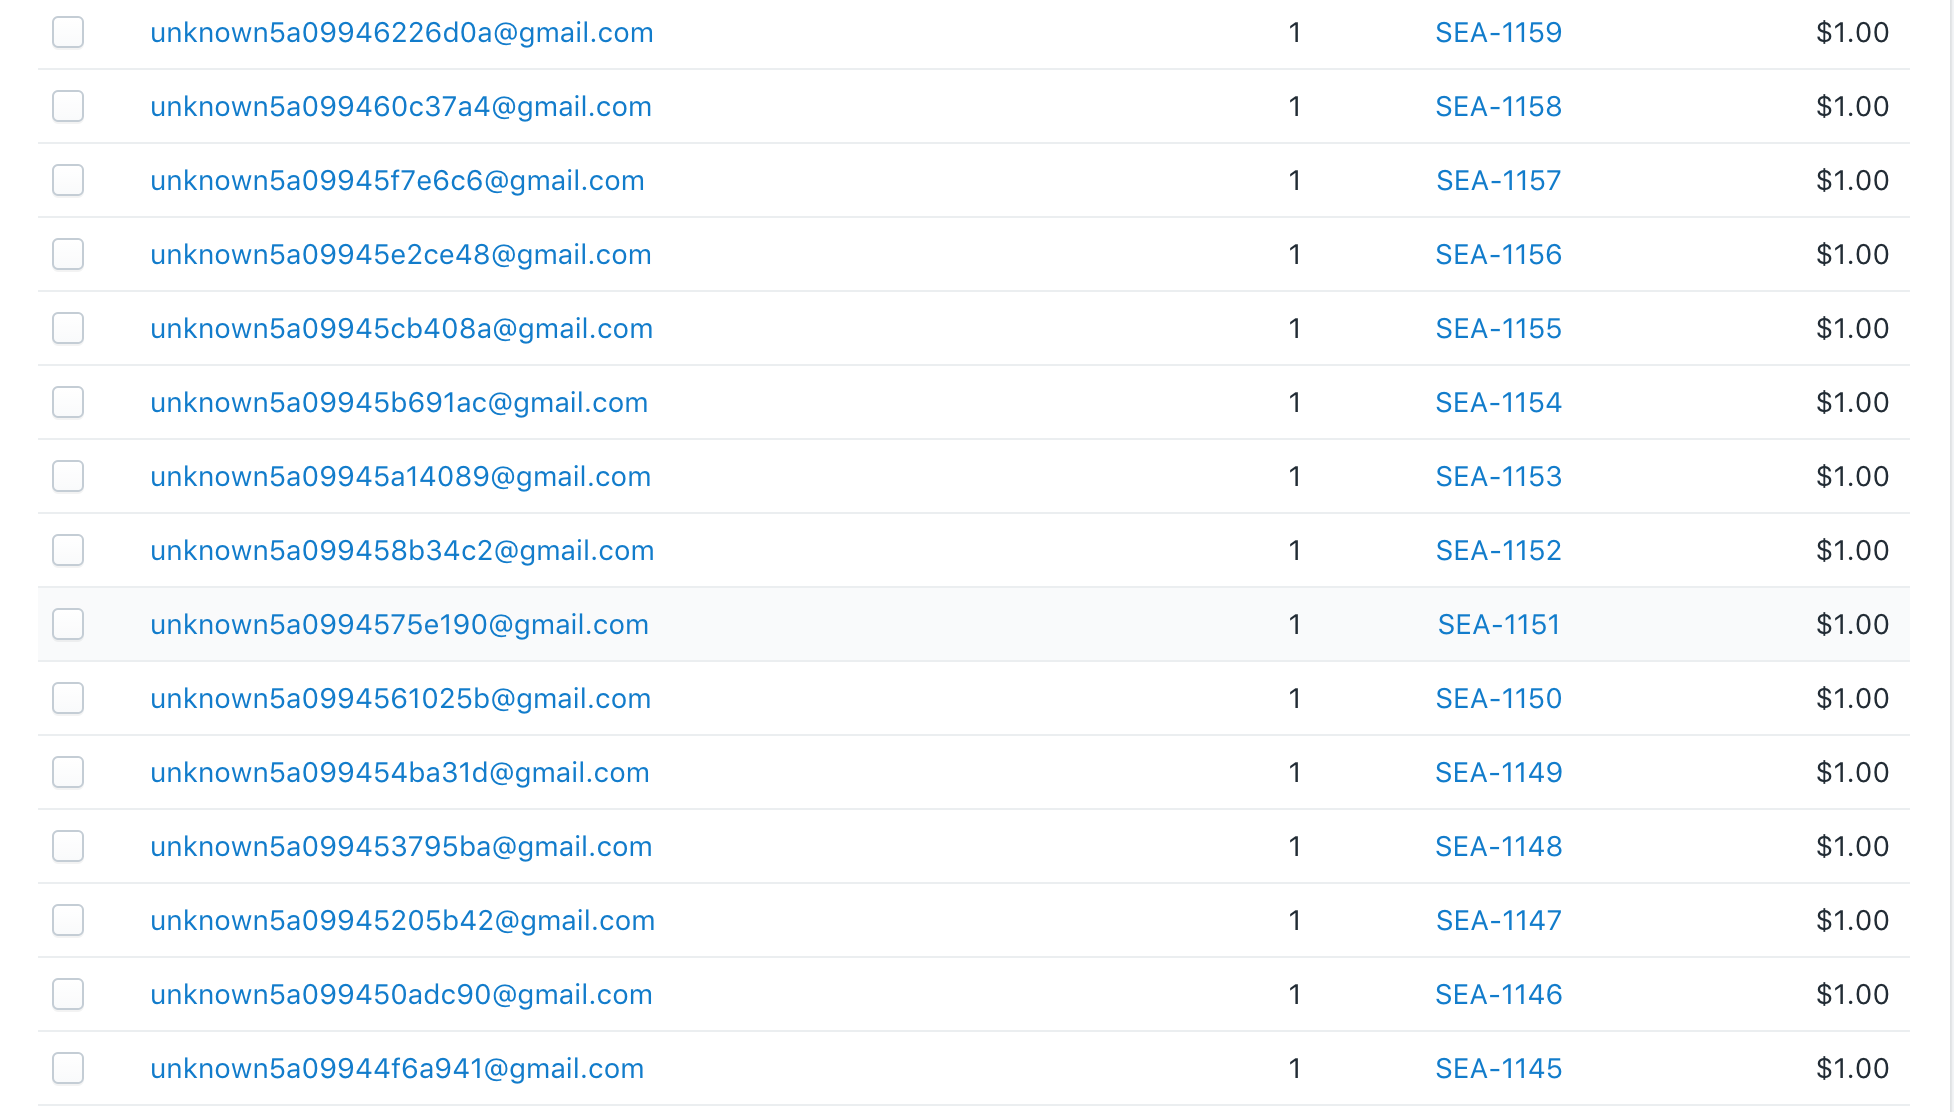 Why "unknown" email addresses are created after migration to Shopify?